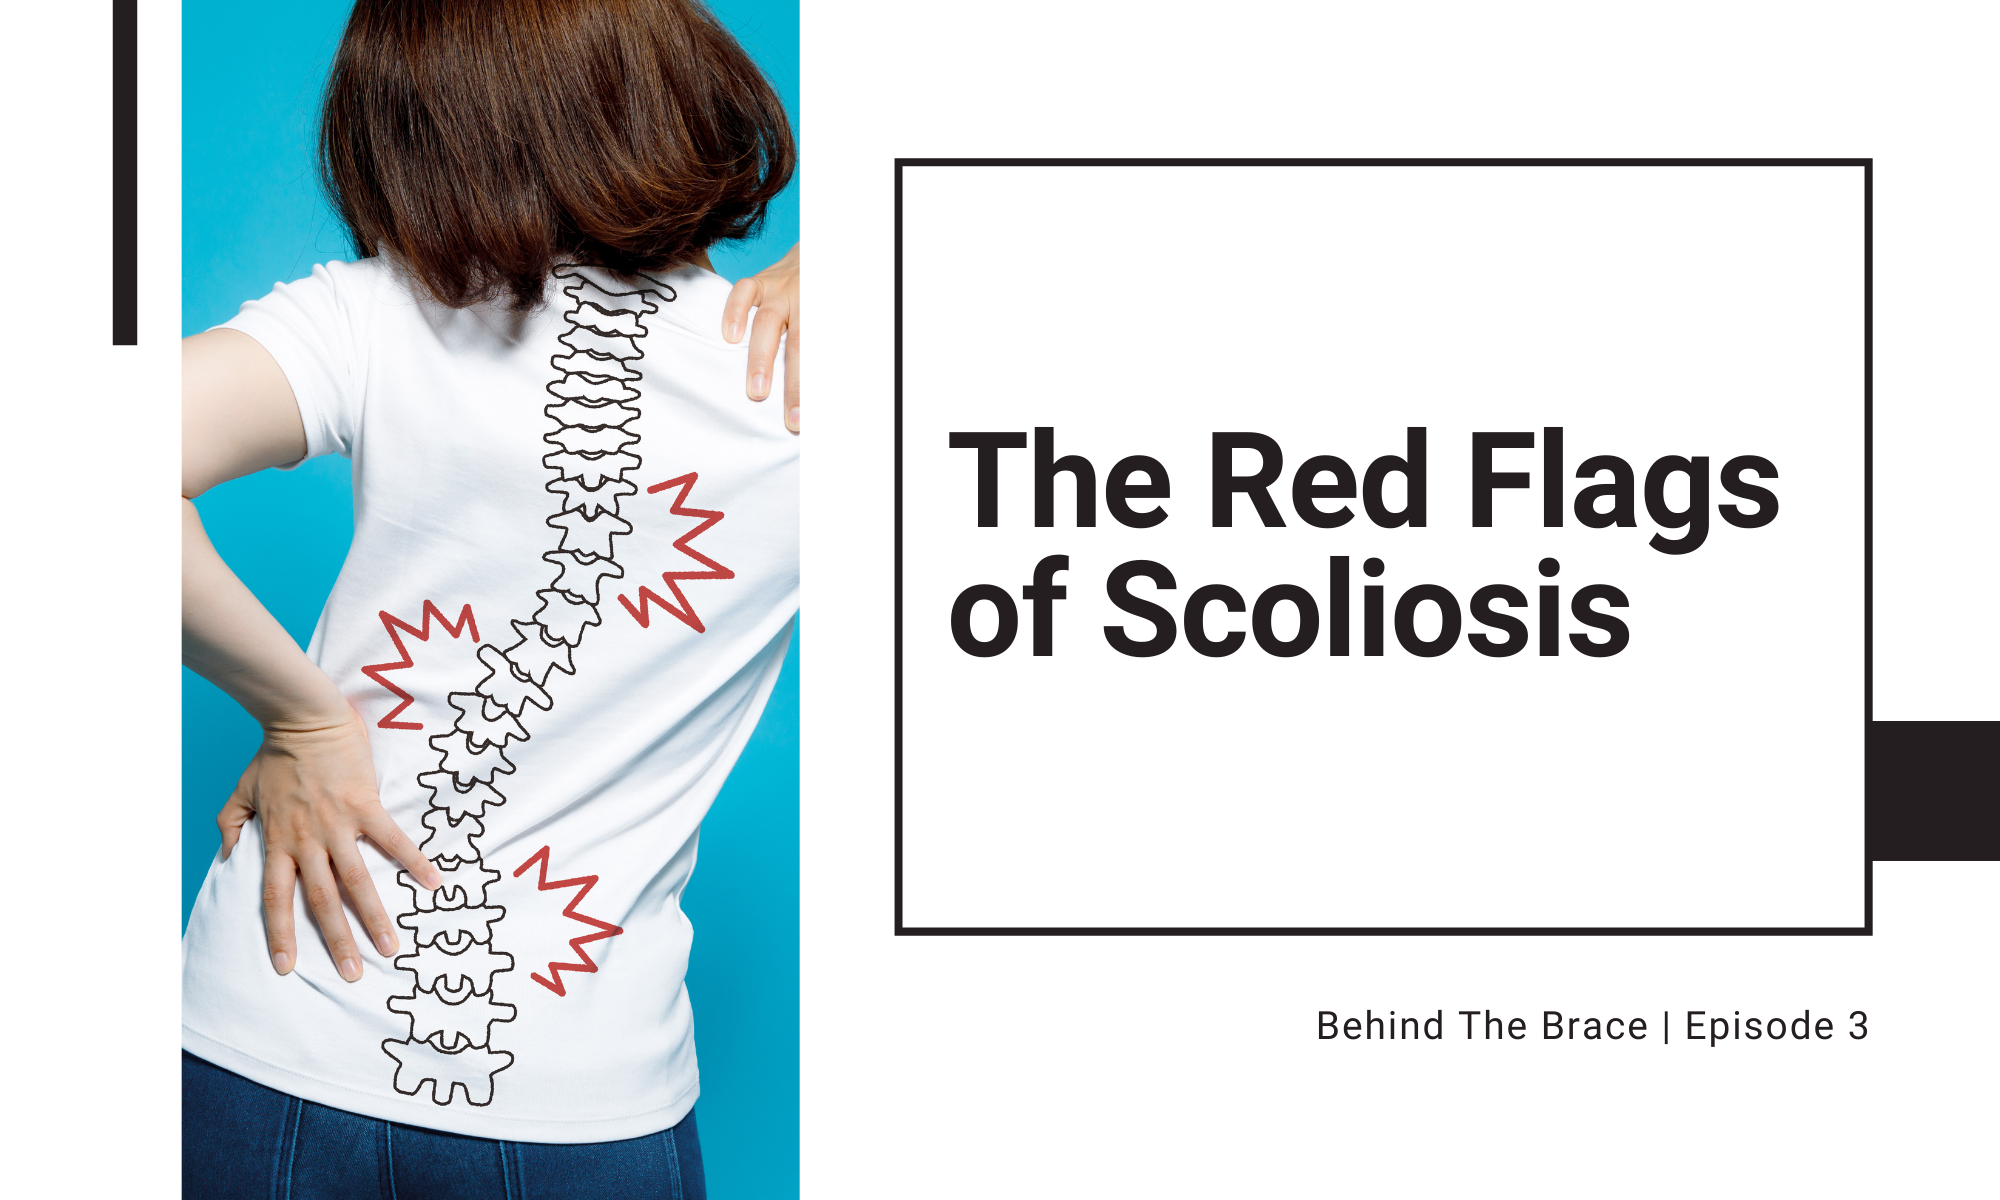 The Red Flags of Scoliosis